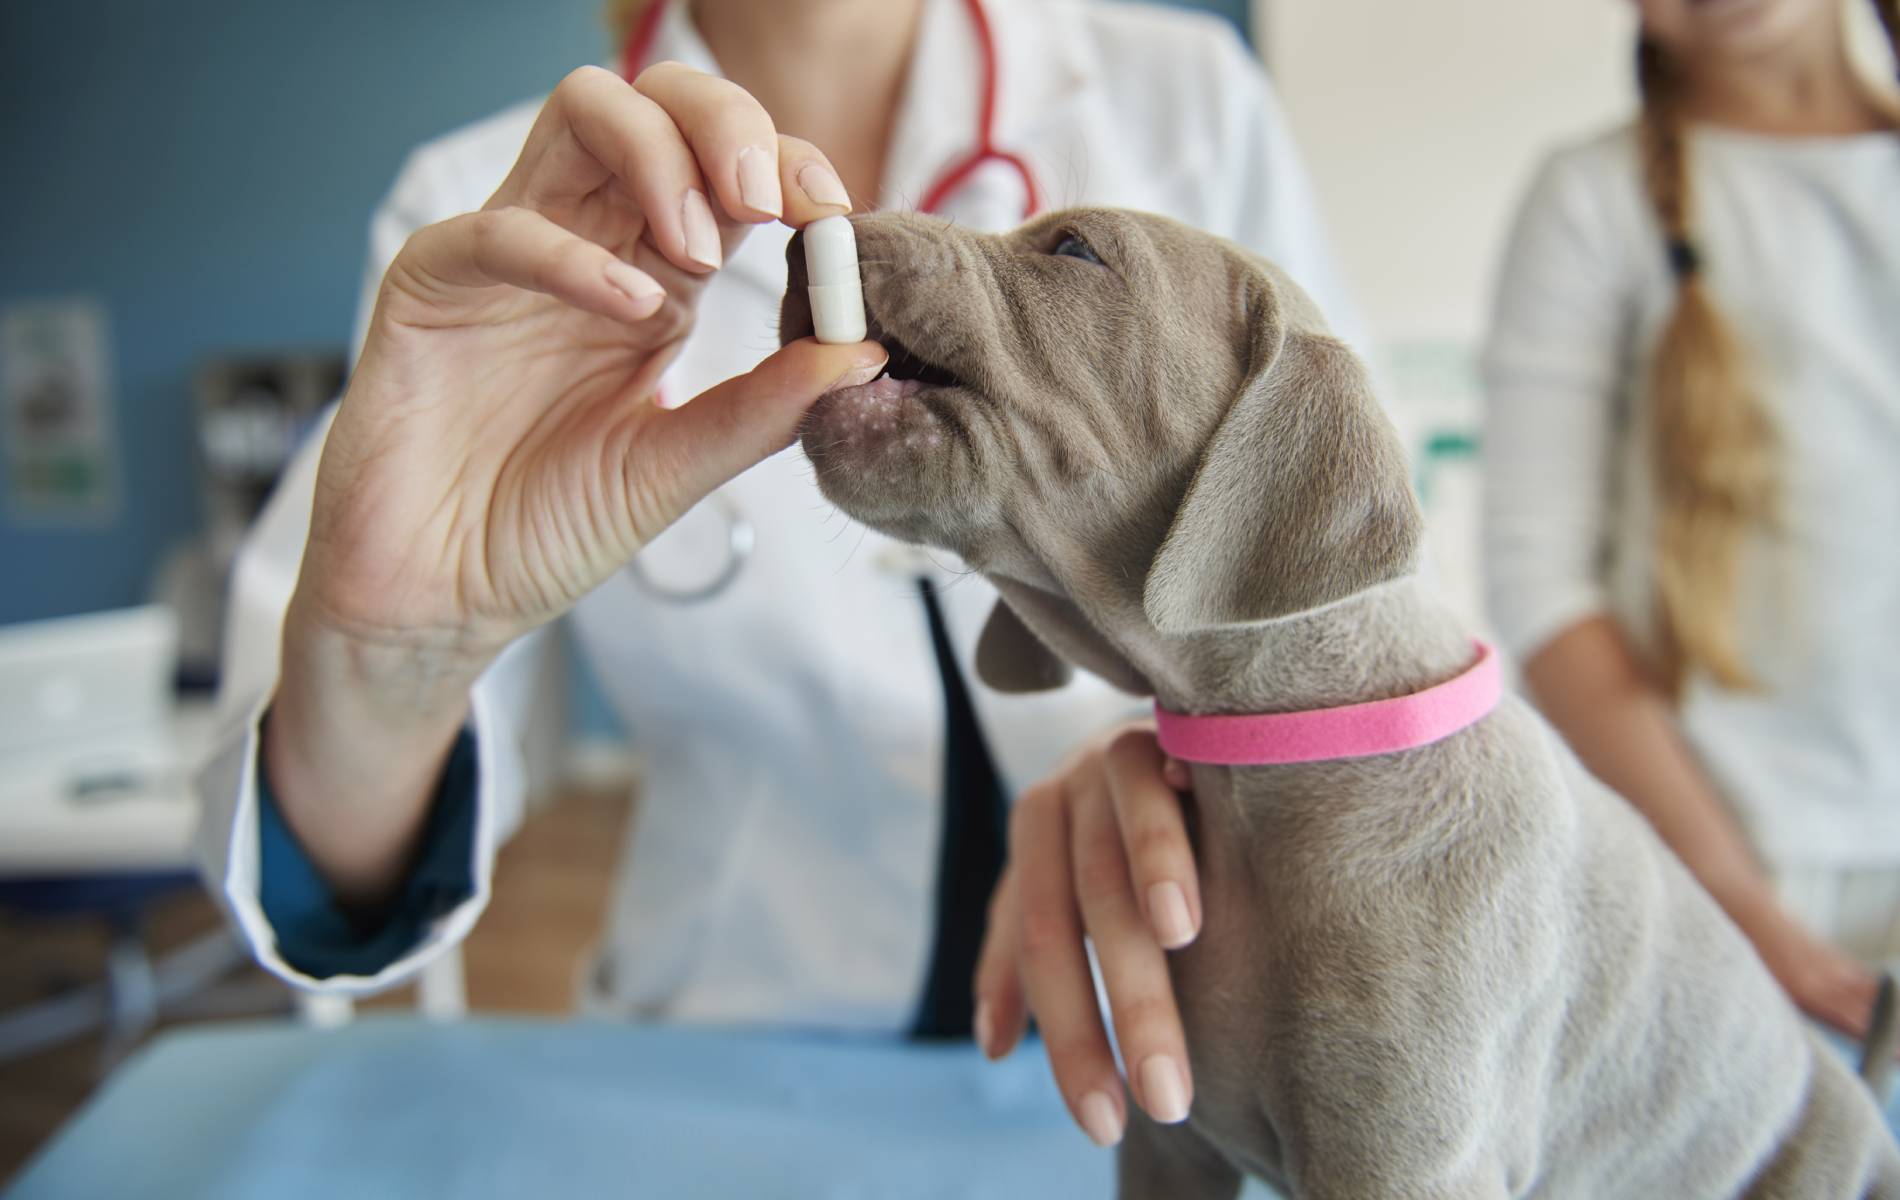 A dog being fed medicine by a doctor